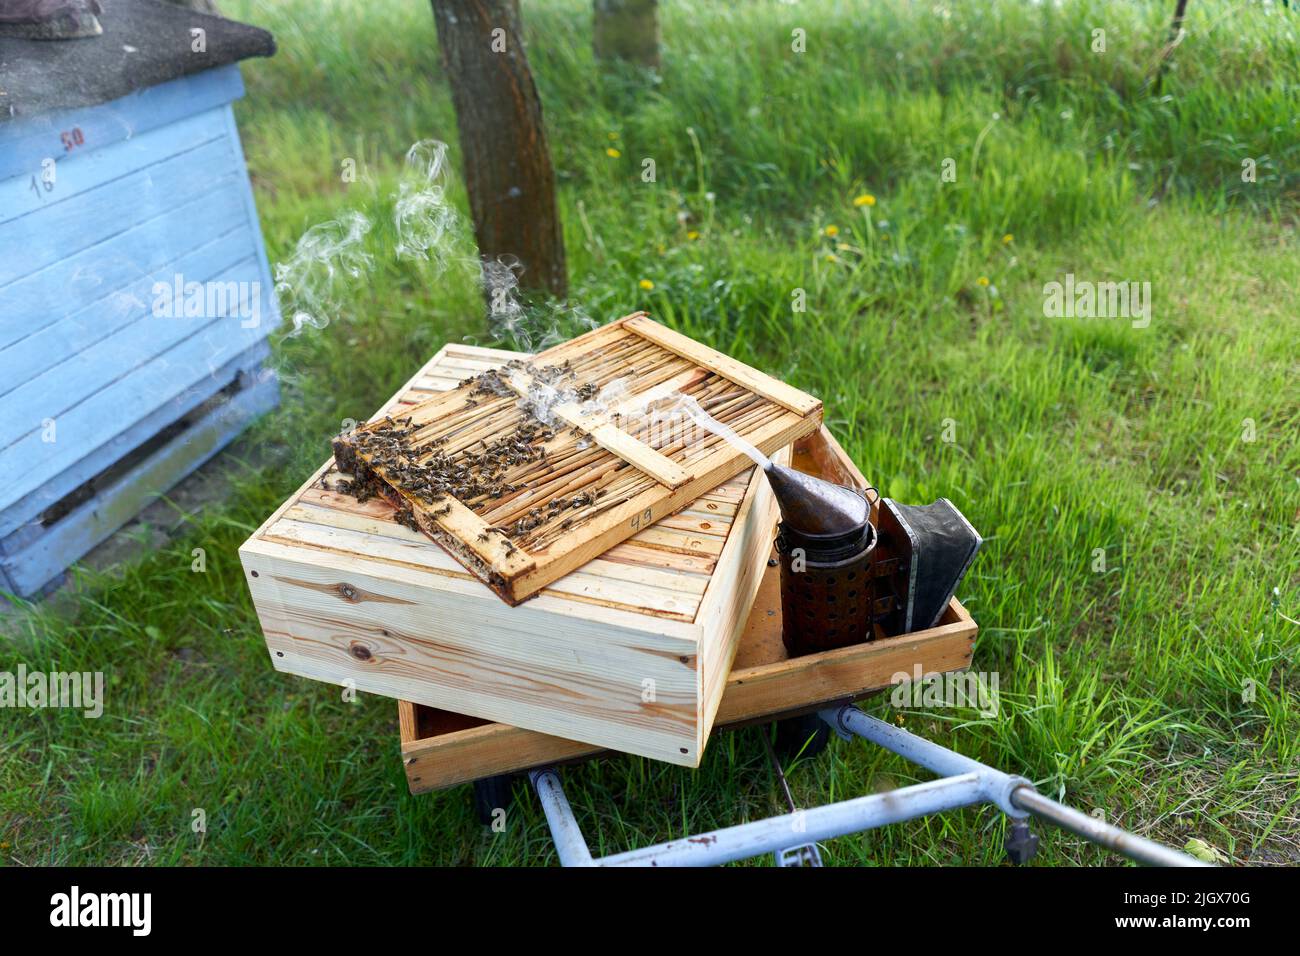 Traditional smoke canister to scare off bees on wheelbarrow outdoors Stock Photo